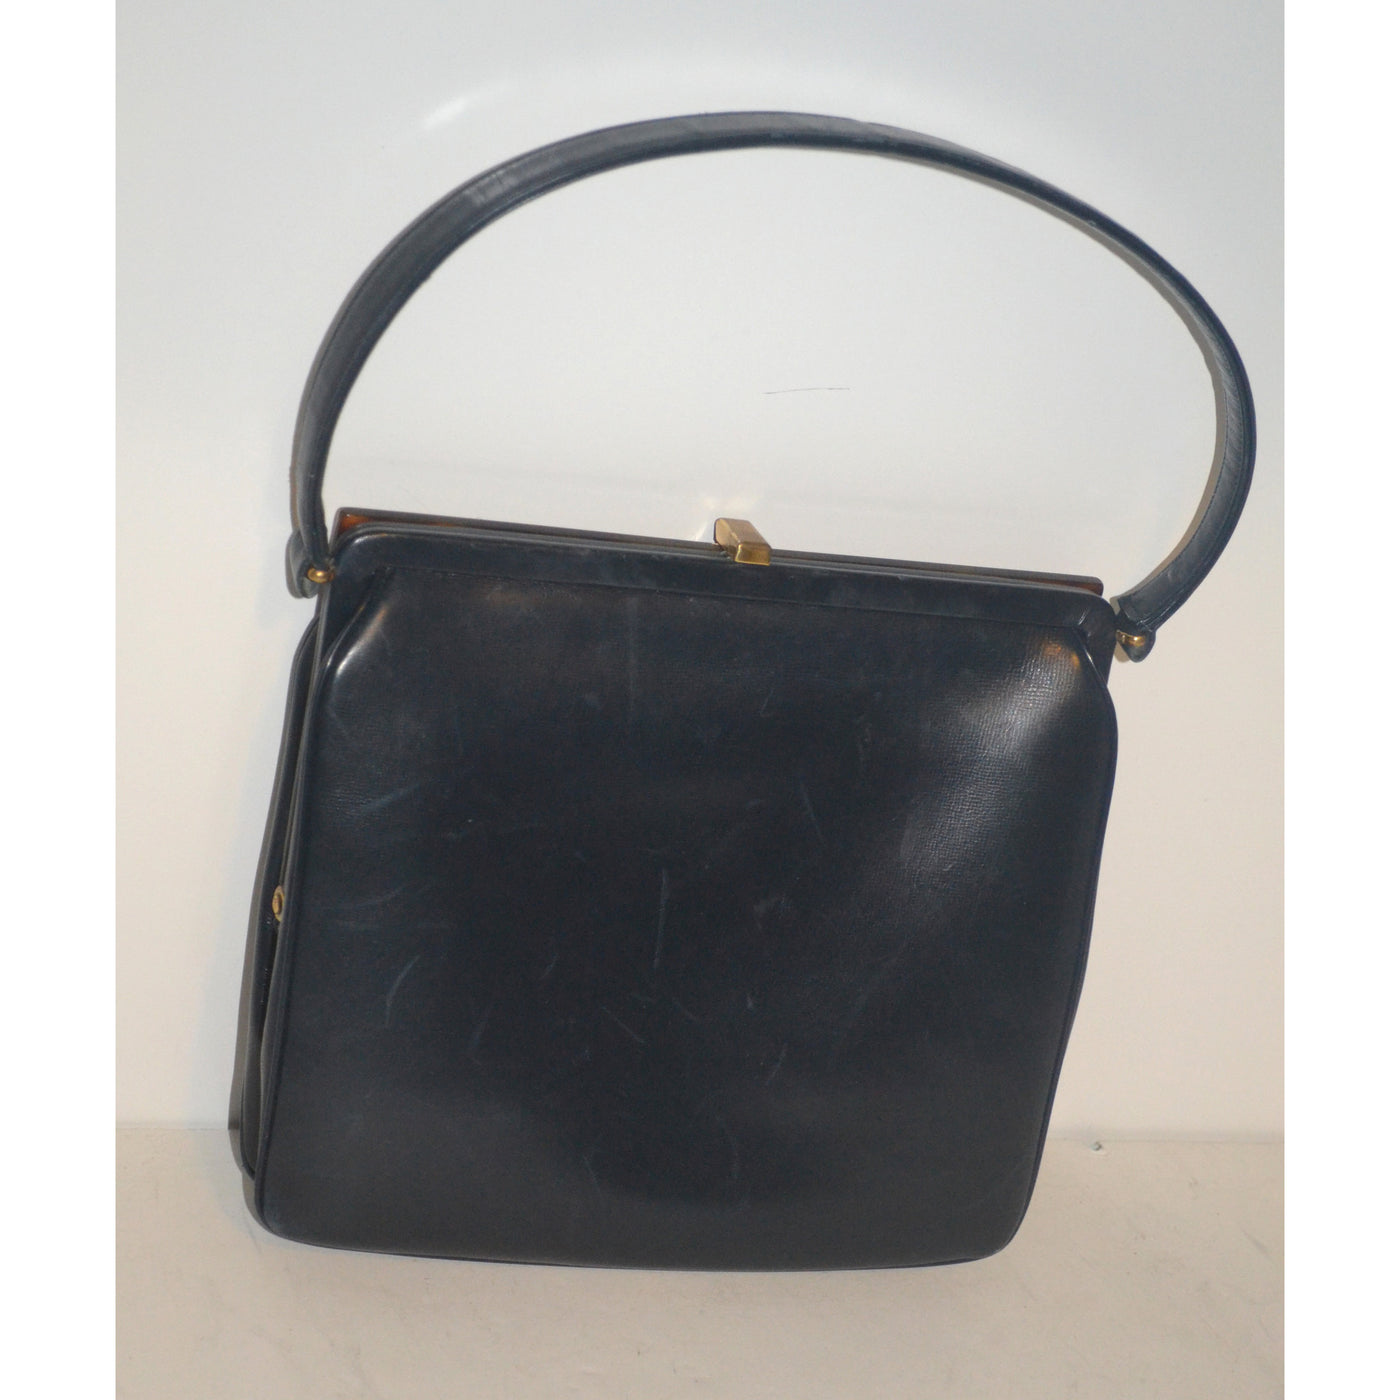 Vintage Navy Leather & Tortoise Purse By Susan Gail